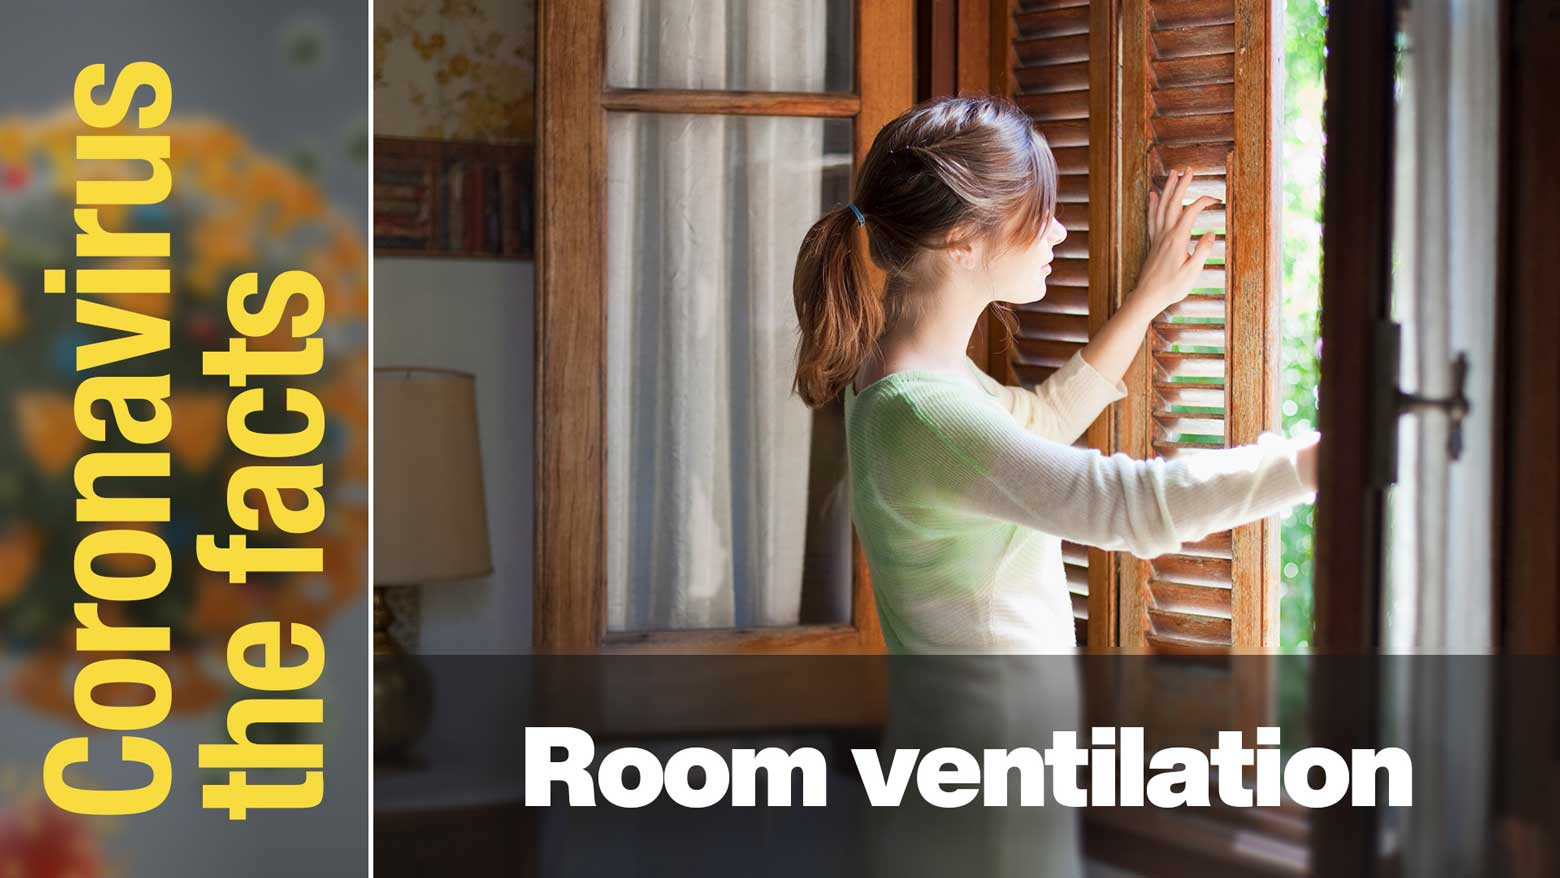 How can we keep our rooms ventilated?